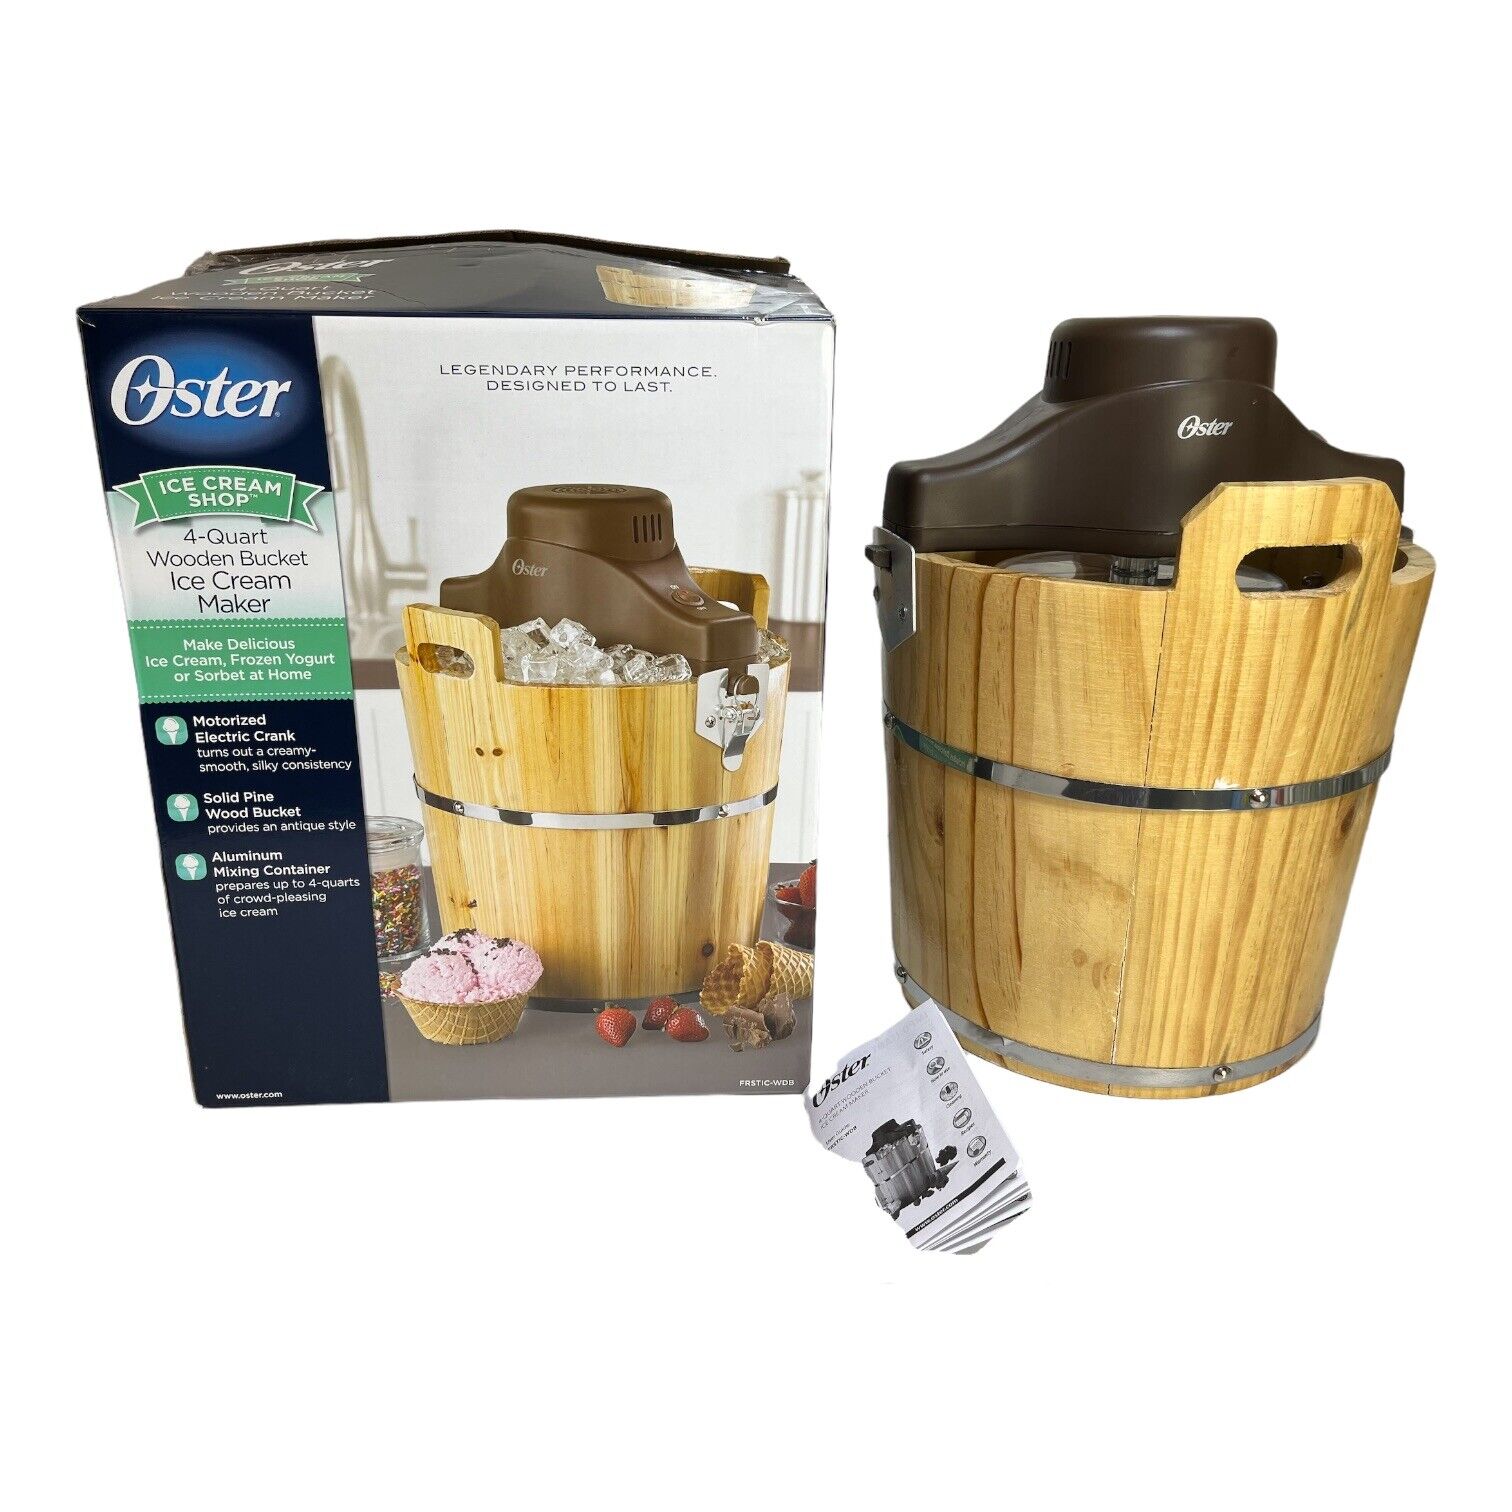 how-to-use-oster-4-quart-wooden-bucket-ice-cream-maker